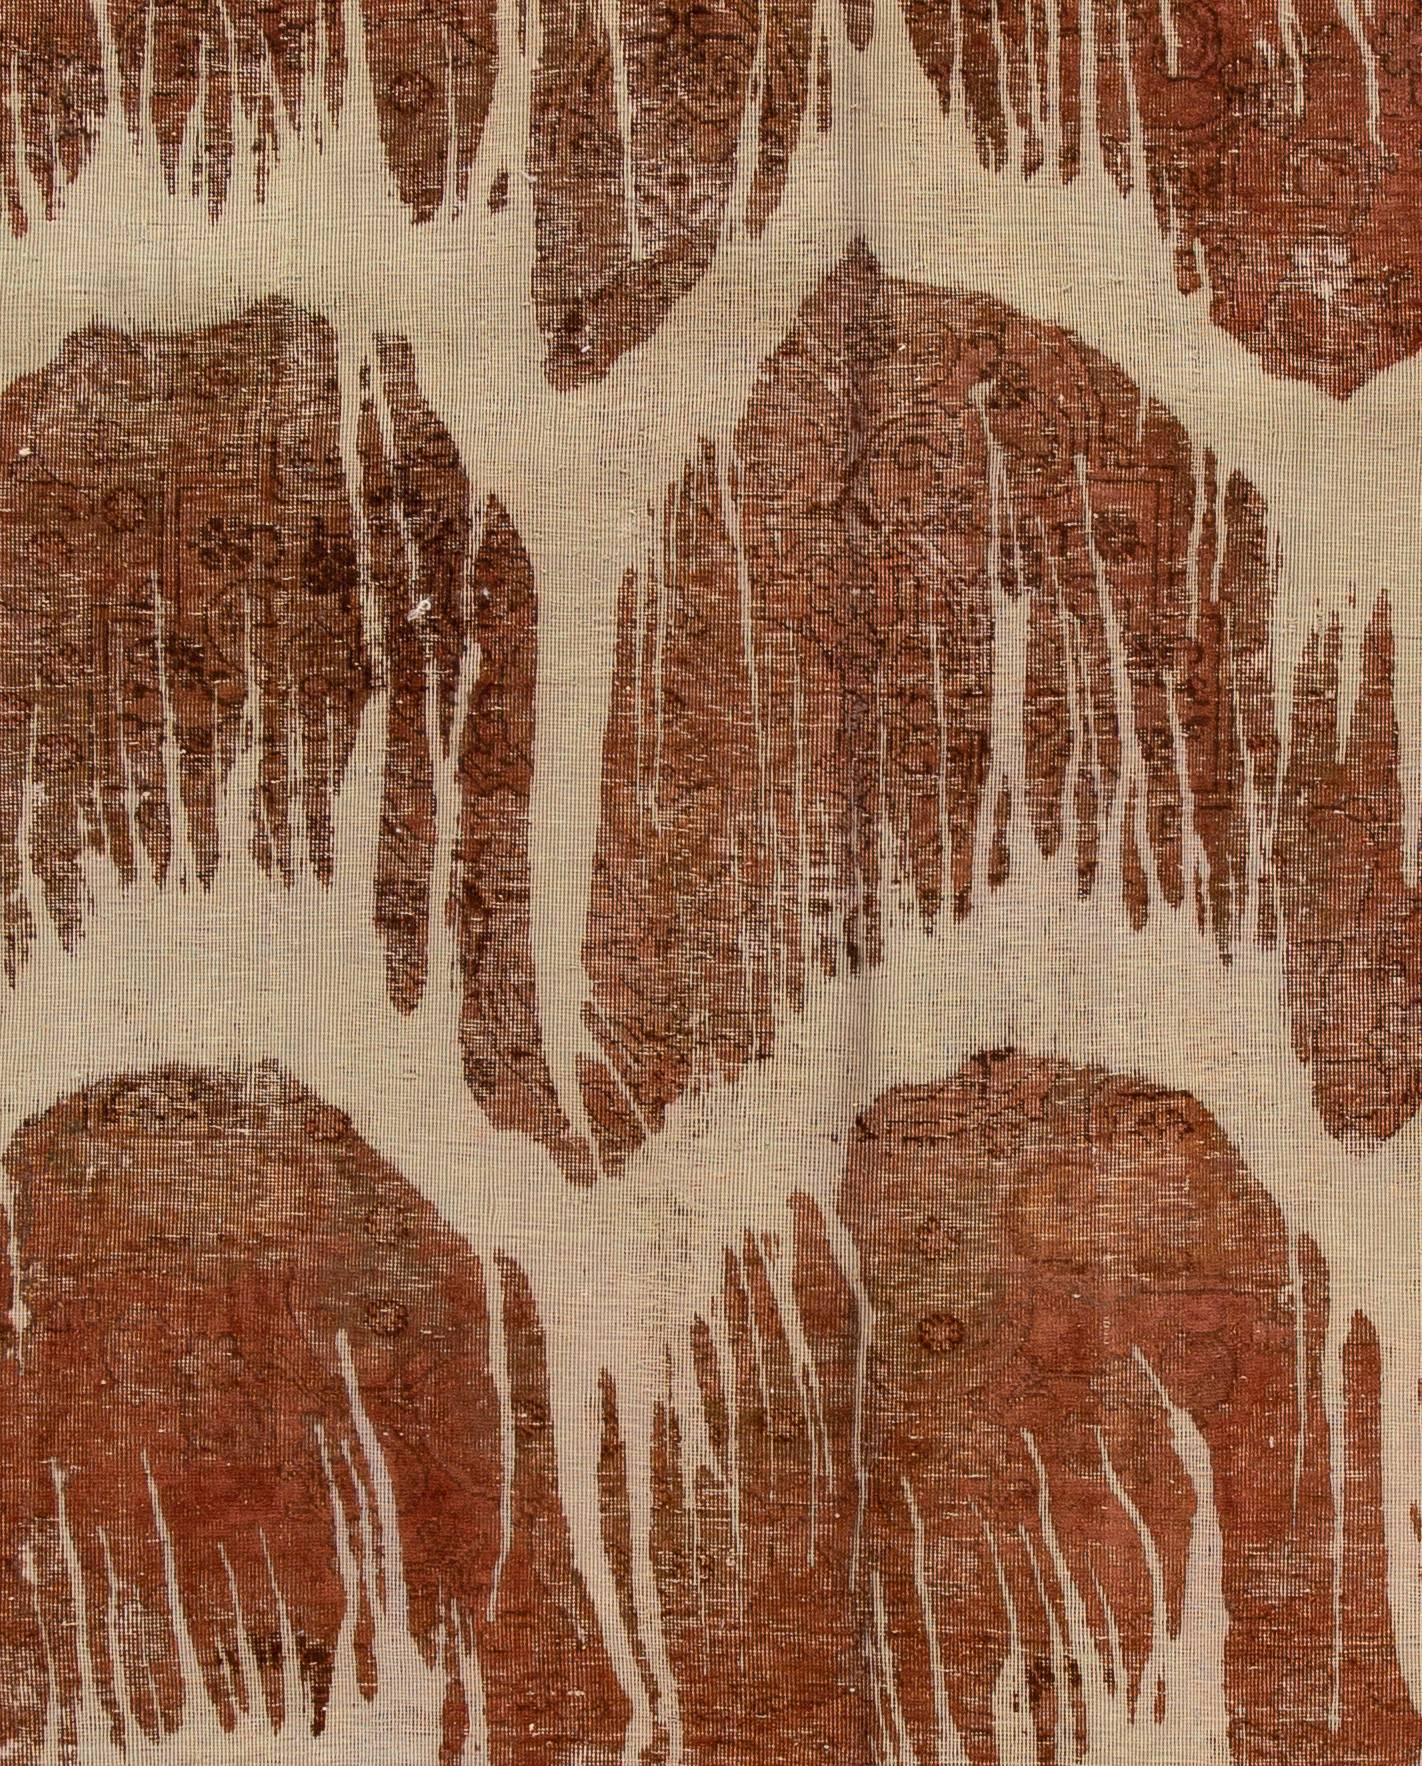 A vintage hand-knotted overdyed distressed rug with an all-over design. This rug measures 8'7